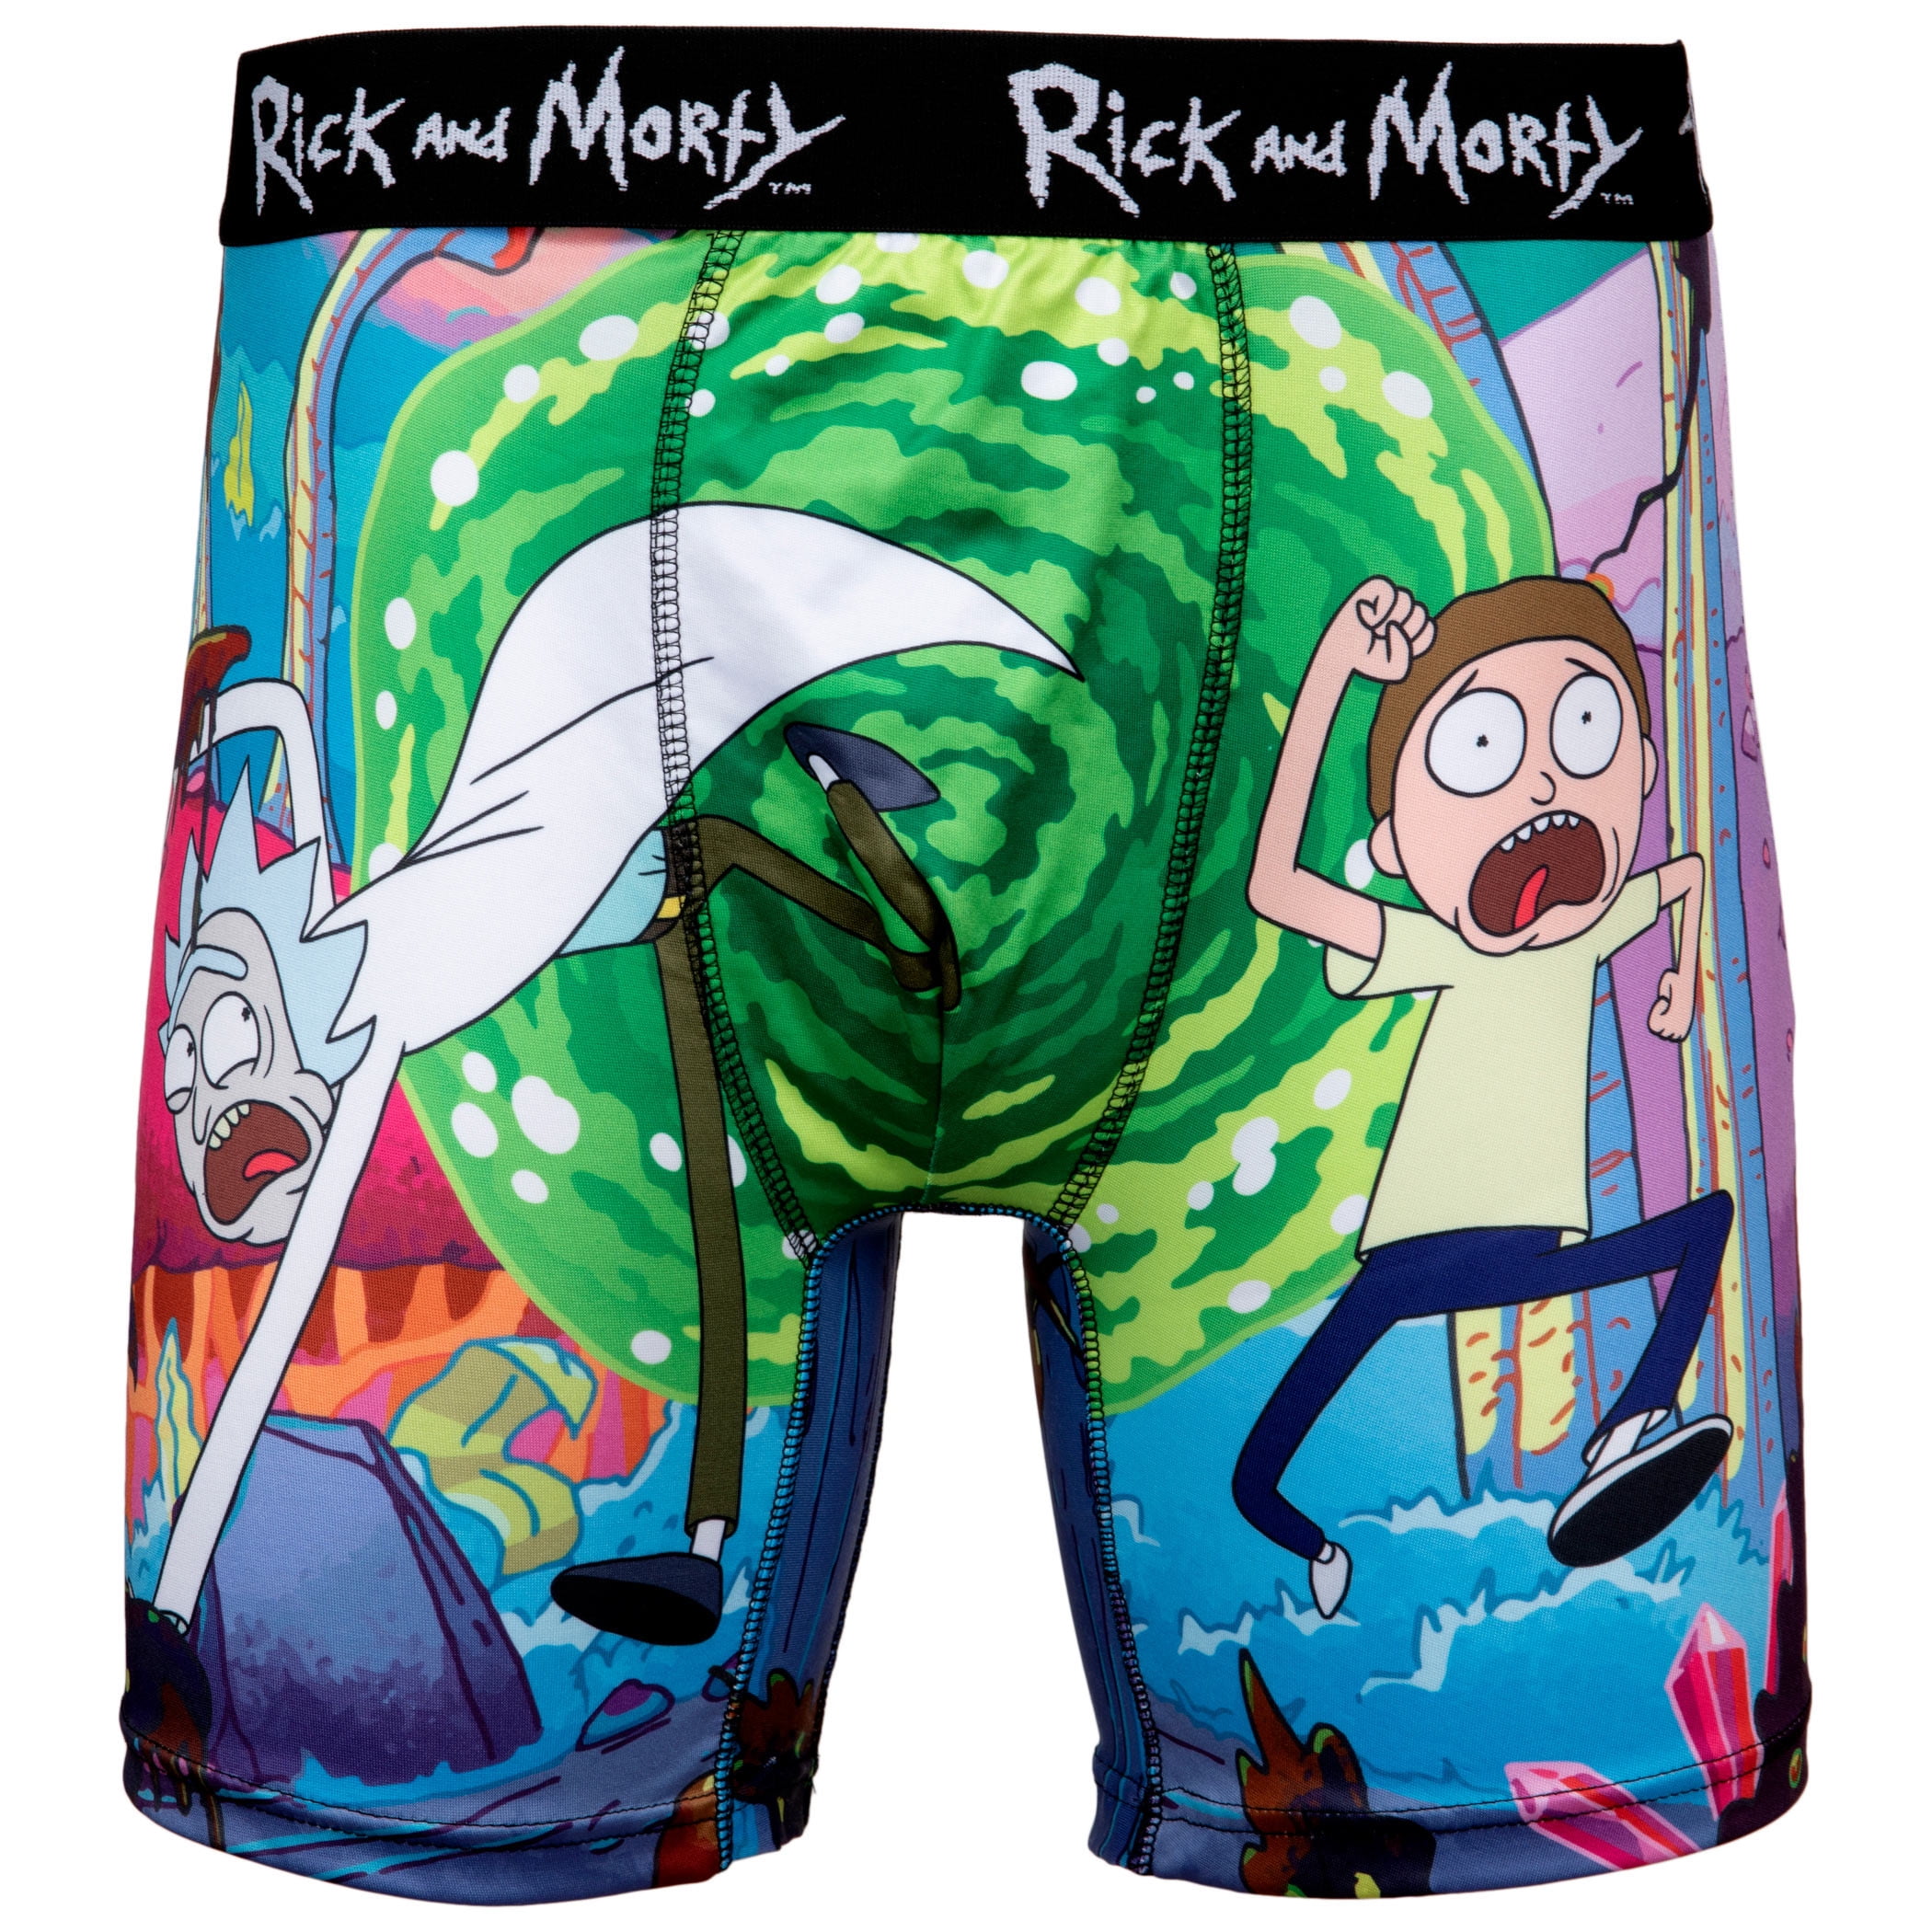 Rick and Morty Chased Out Of Portal Boxer Briefs-Large (36-38) 